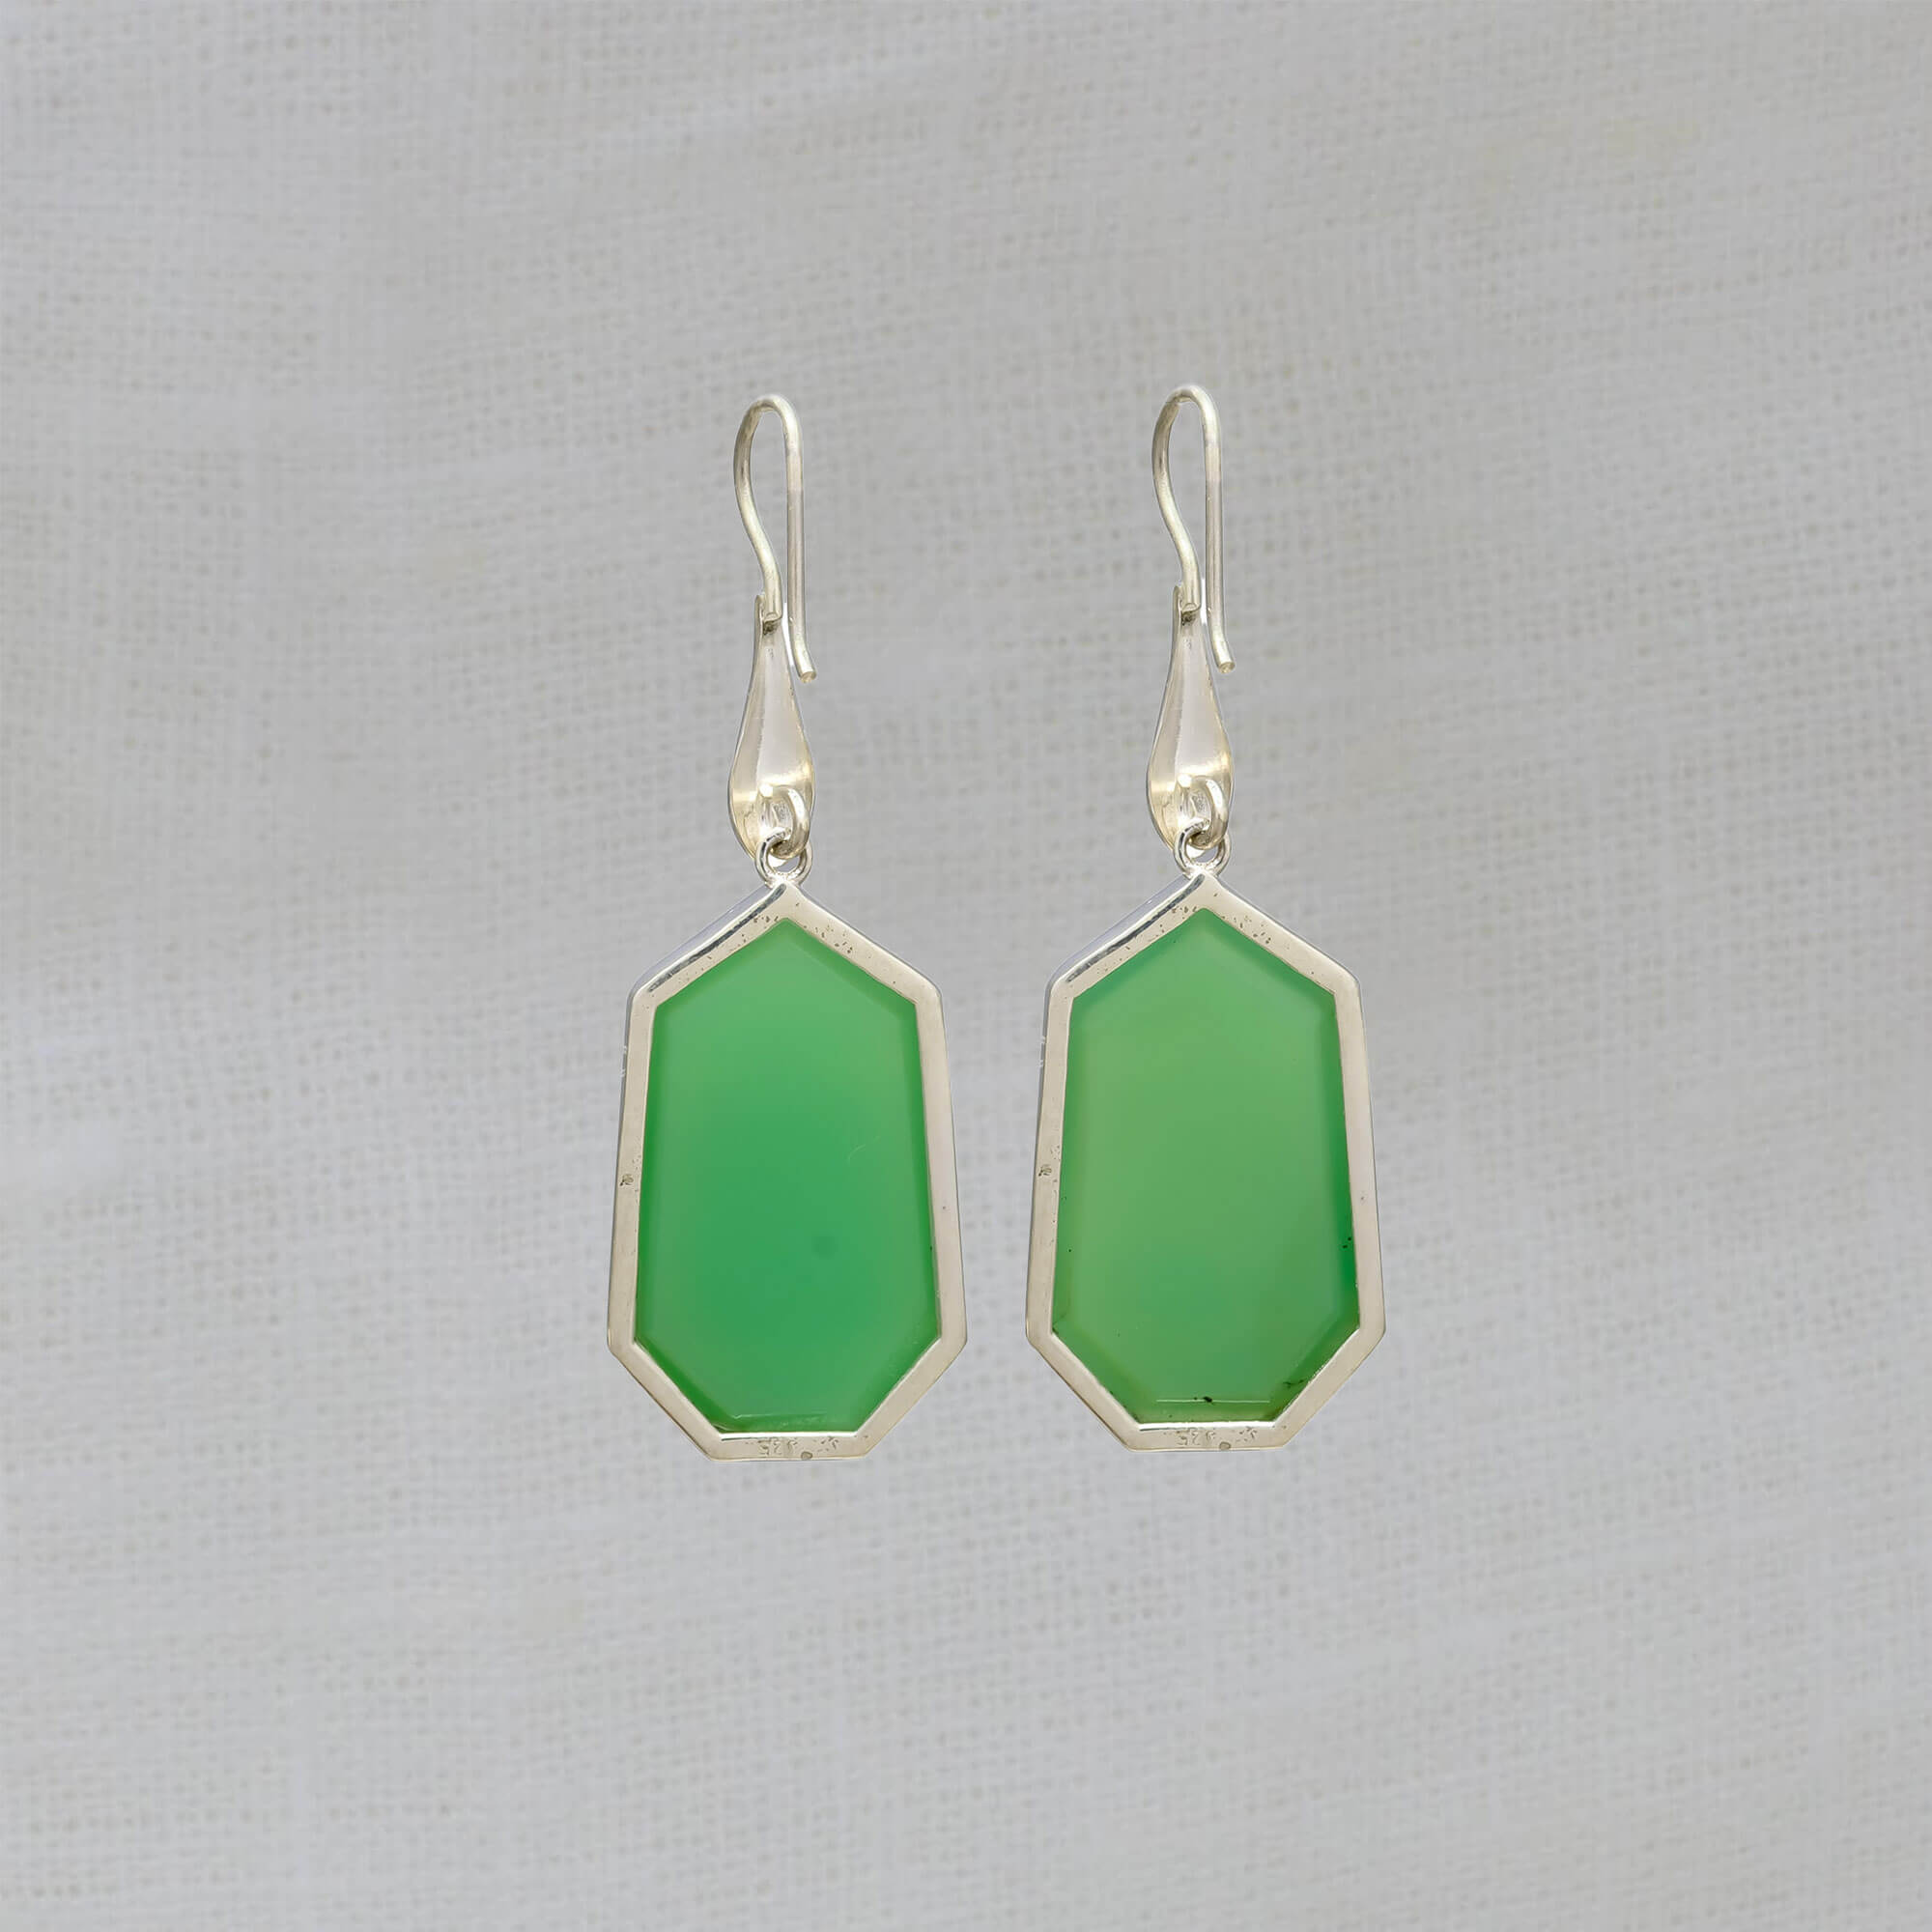 Large chrysoprase gemstone earrings in sterling silver with a hook fitting